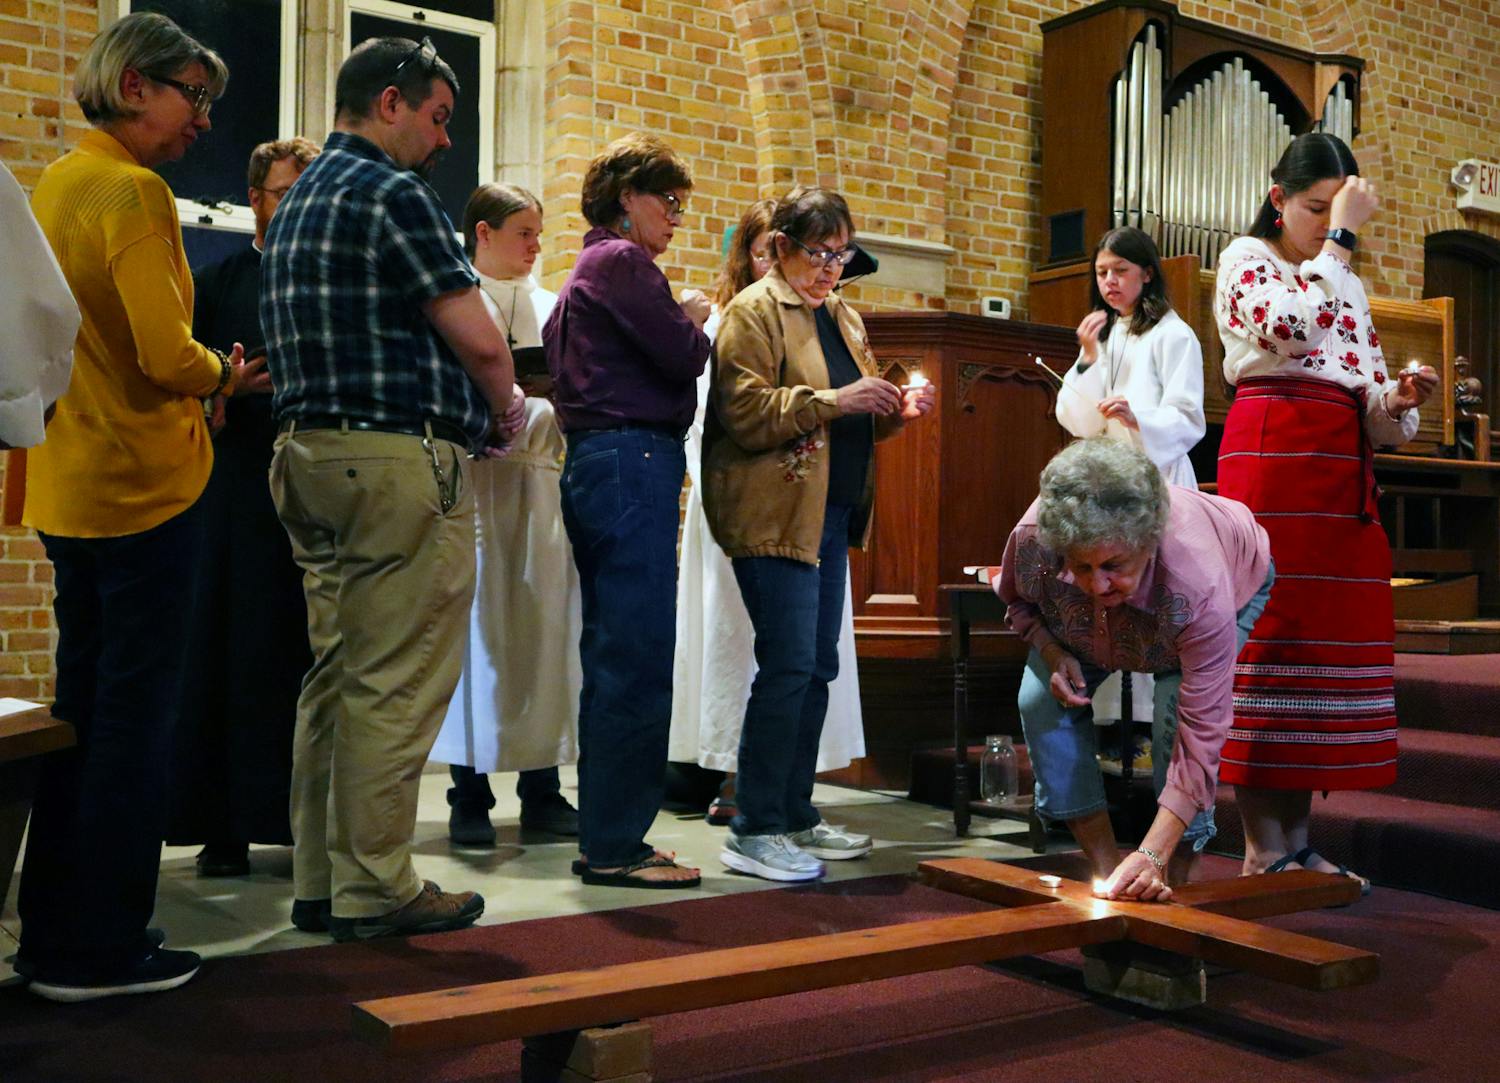 Attendees at an ecumenial vigil for peace in Ukraine offer prayers around the cross at Chapel of the Incarnation Friday, Oct. 14, 2022.